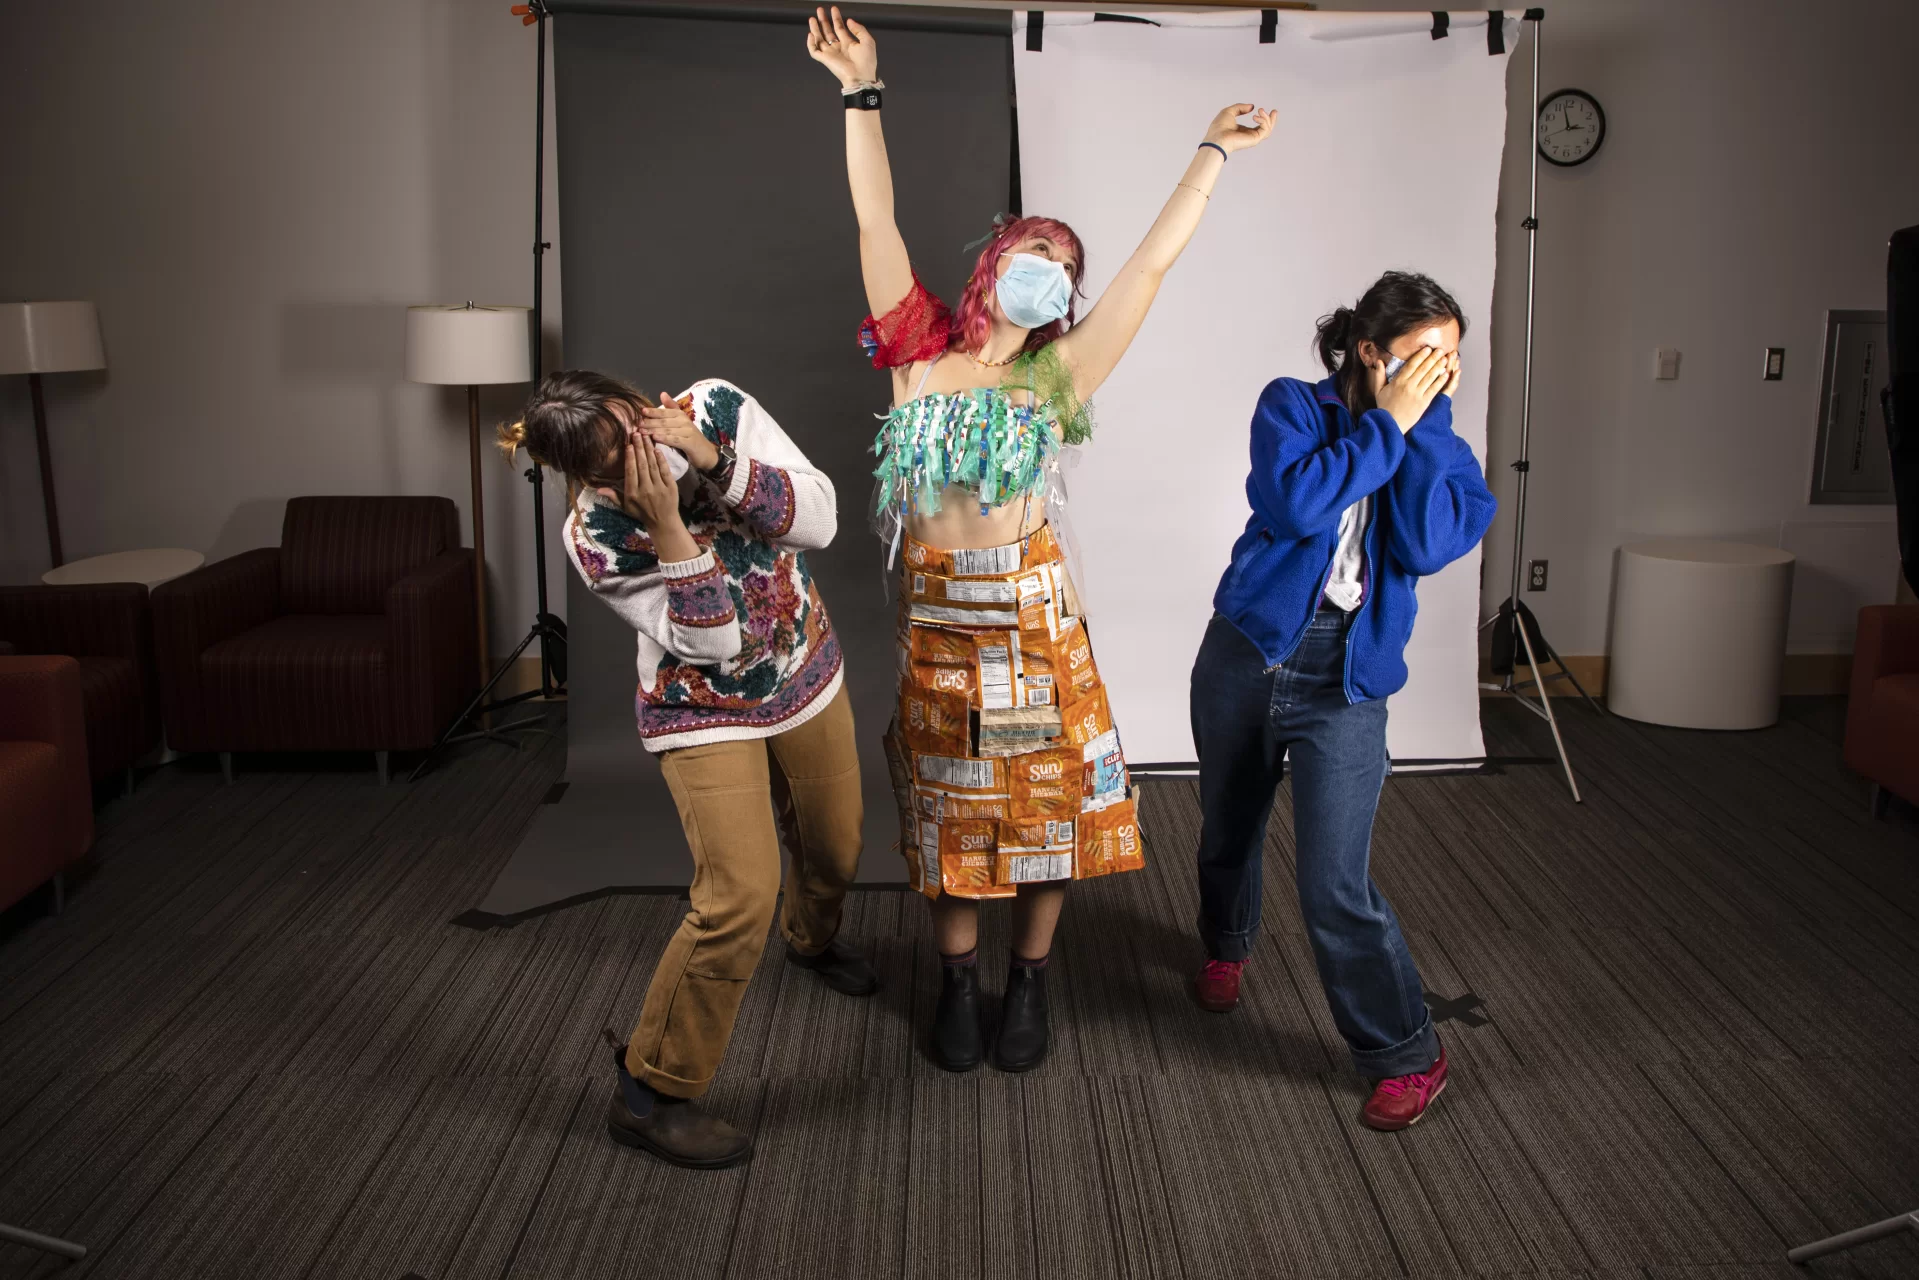 Adelle Welch ‘25 of Livingston, MT, Maria McEvoy ‘25 of Missoula, MT, and Izzy Borah ‘25 of Needham Heights, Mass., pose for portraits dressed in attire created for this years Trashion Show on November 12, 2021.